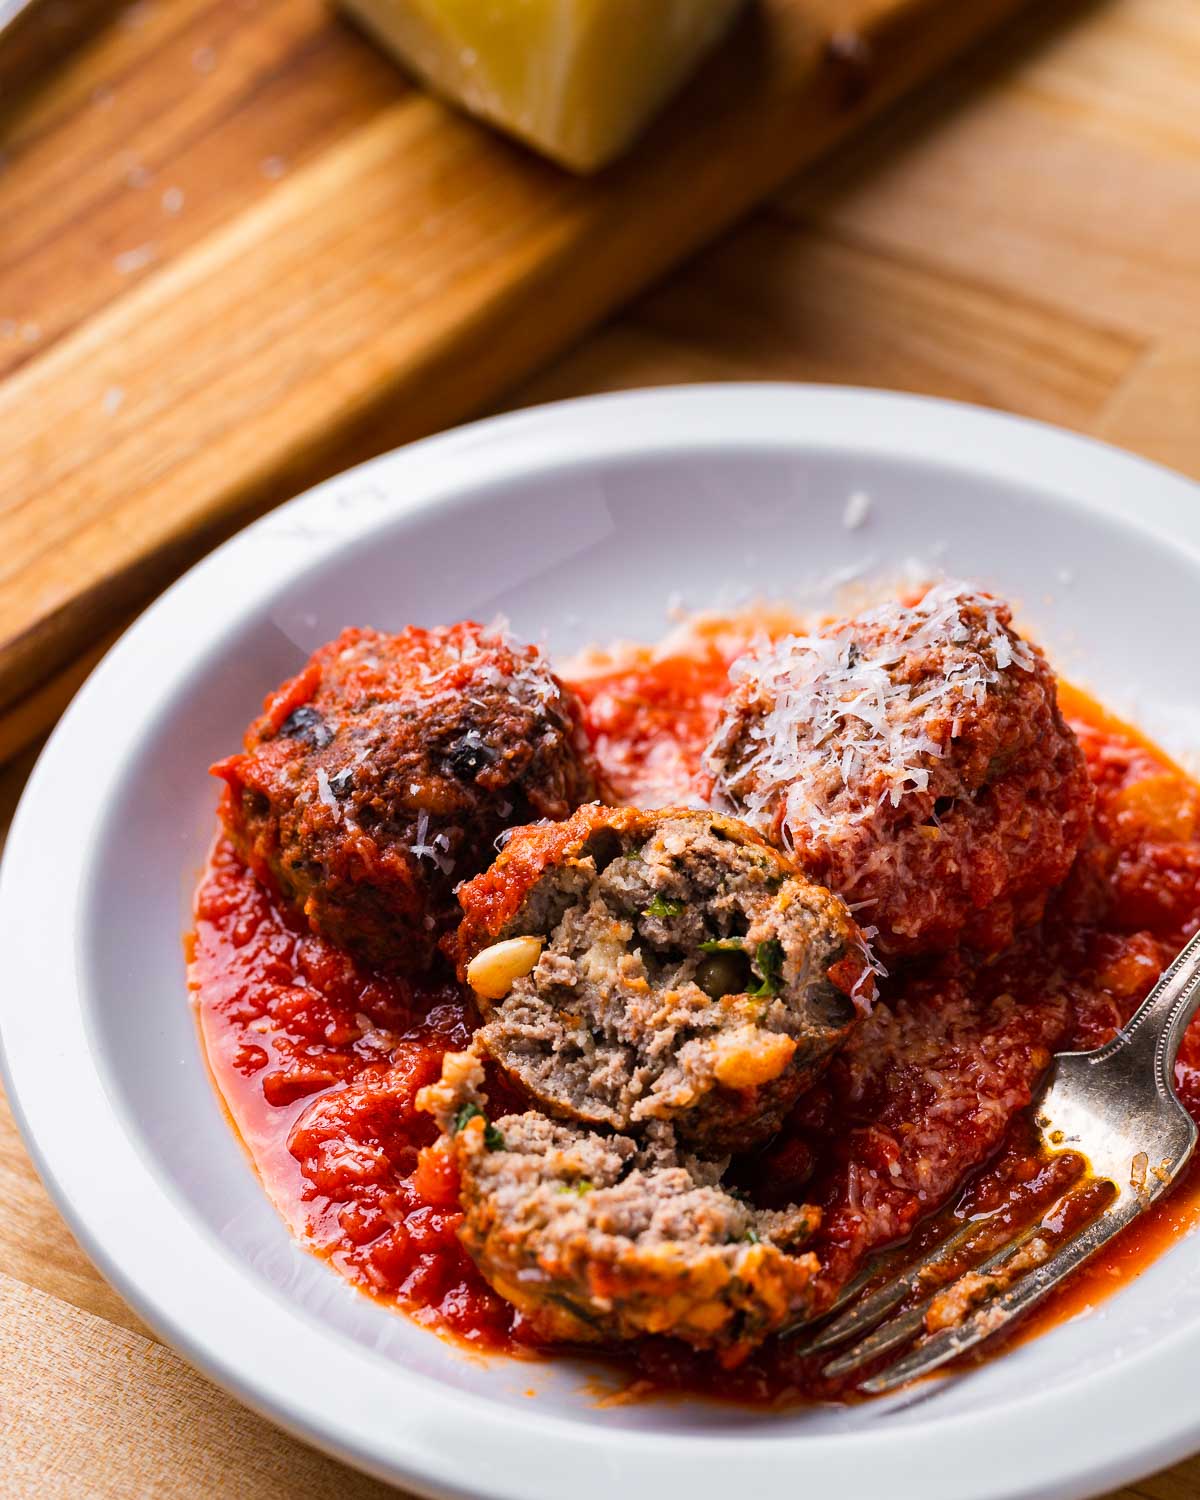 Sicilian style meatball with sauce cut in half in white plate.